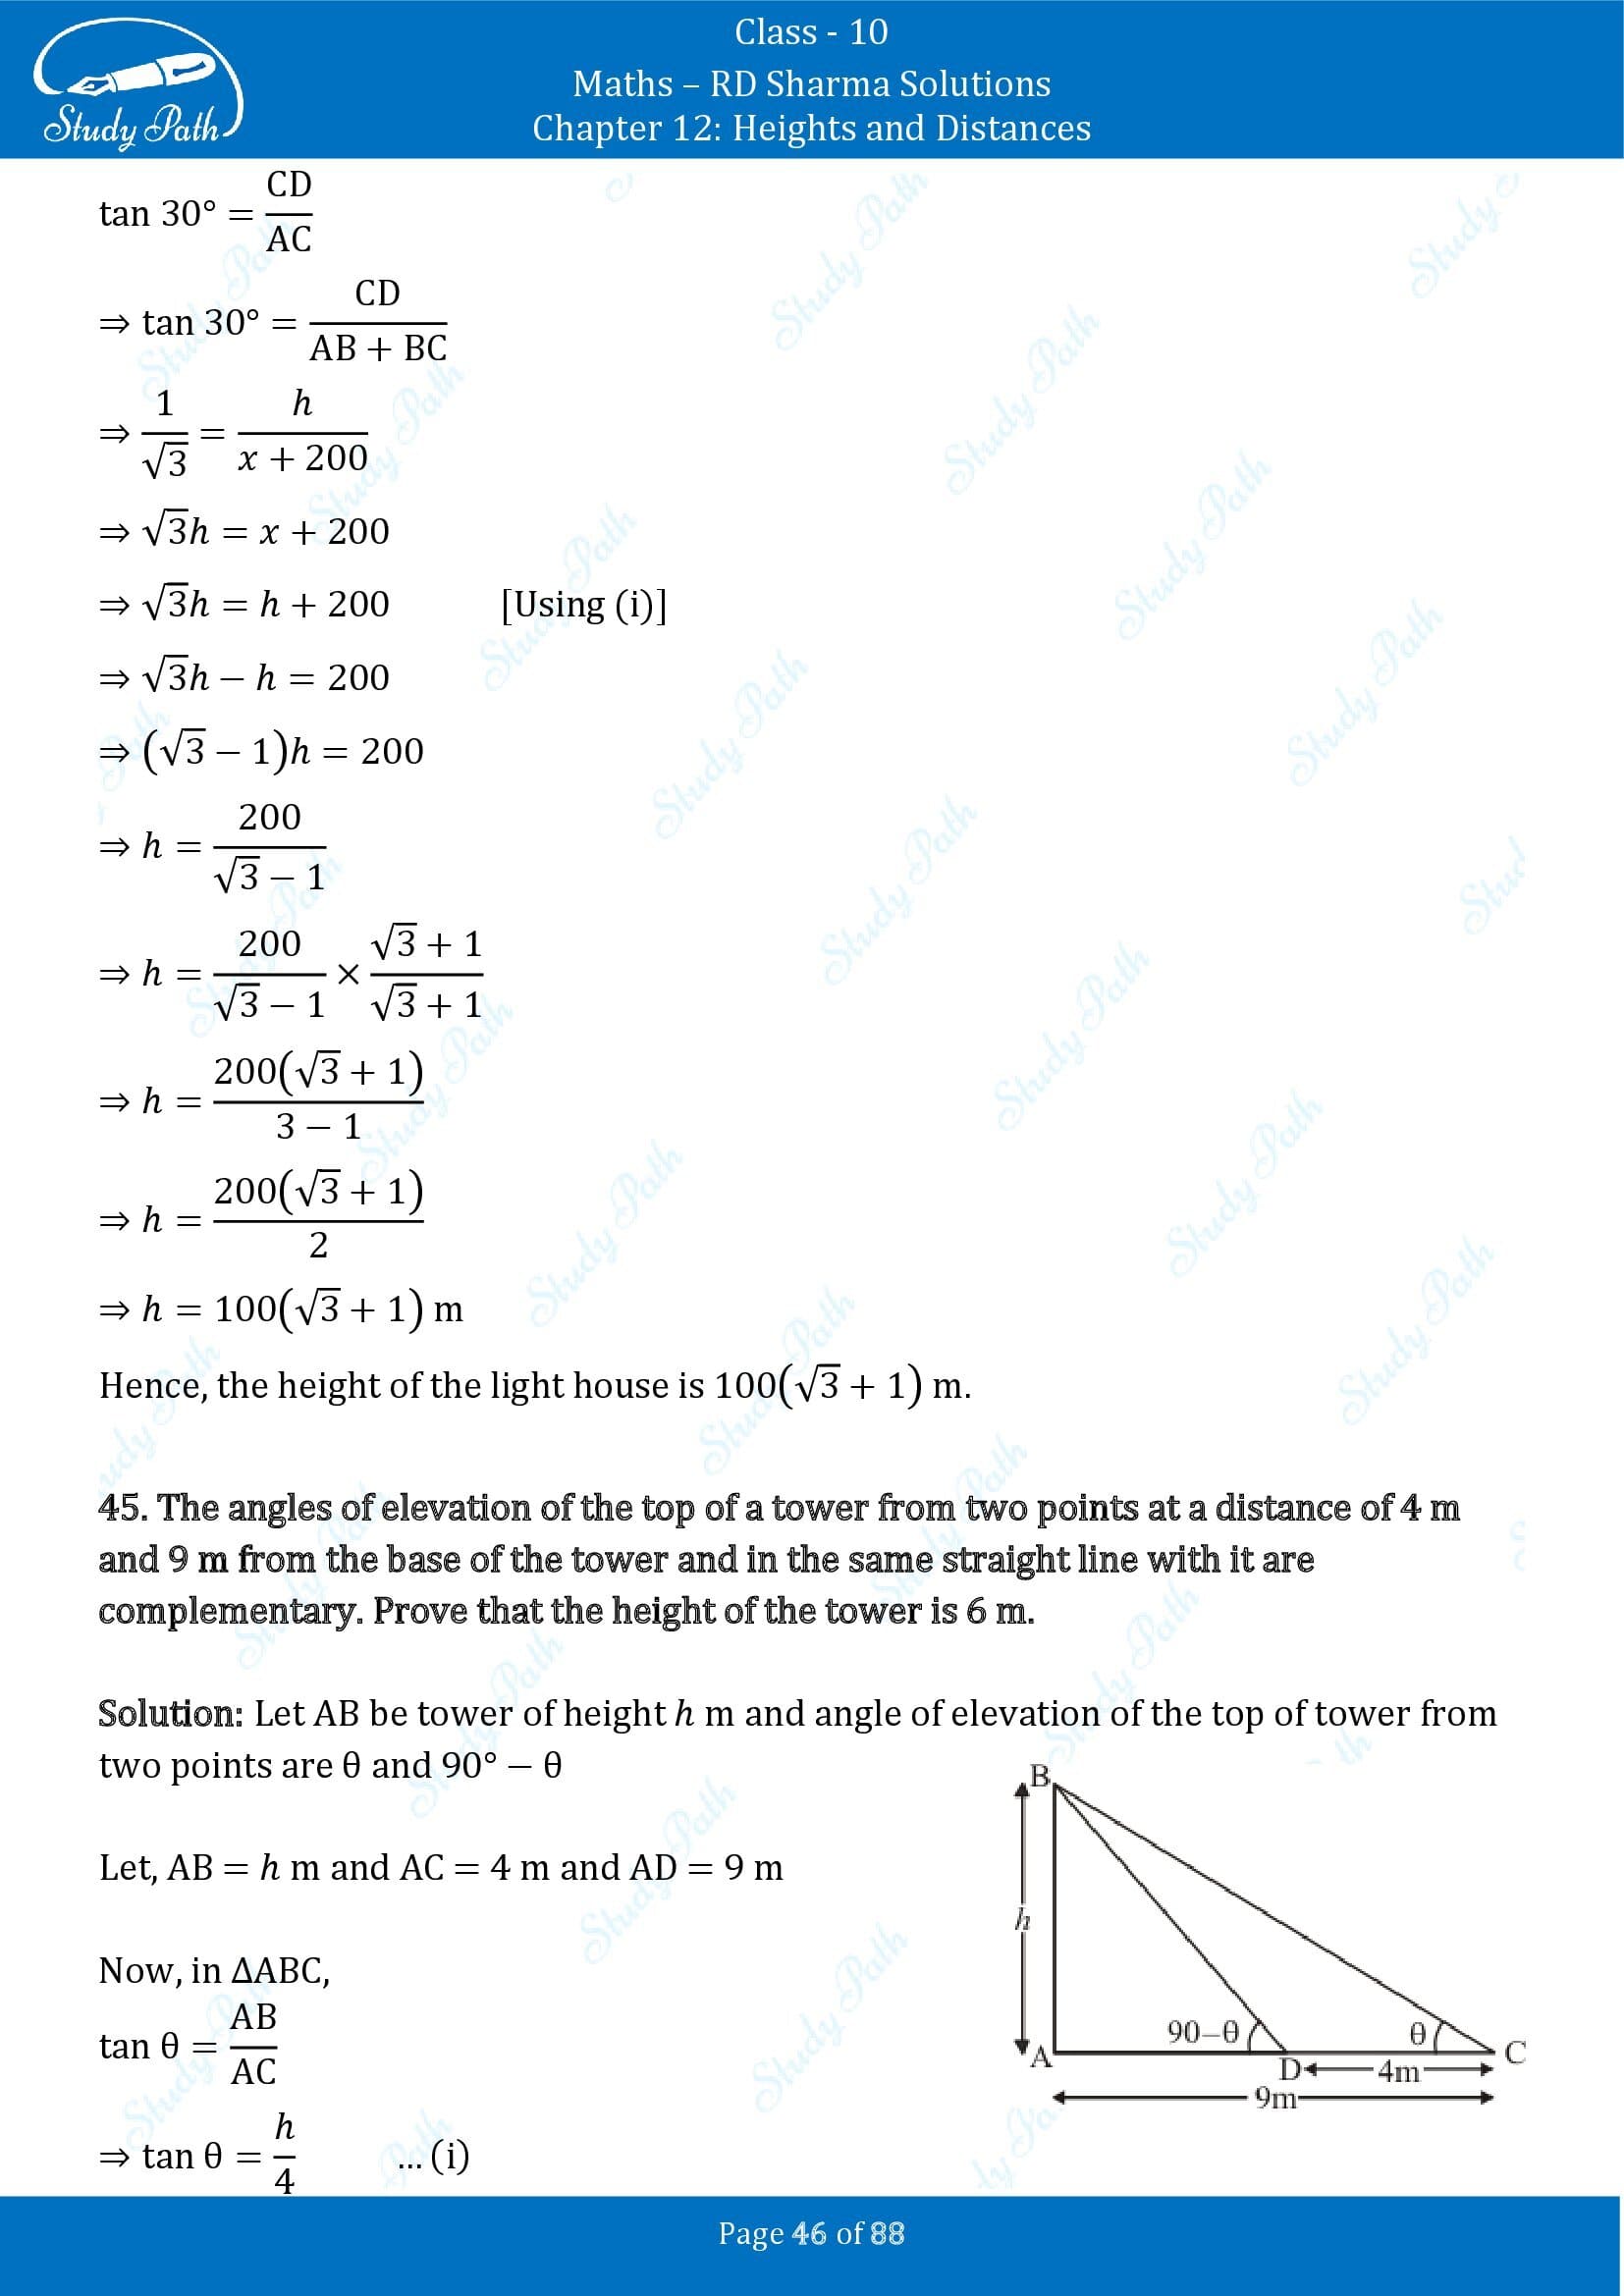 RD Sharma Solutions Class 10 Chapter 12 Heights and Distances Exercise 12.1 00046